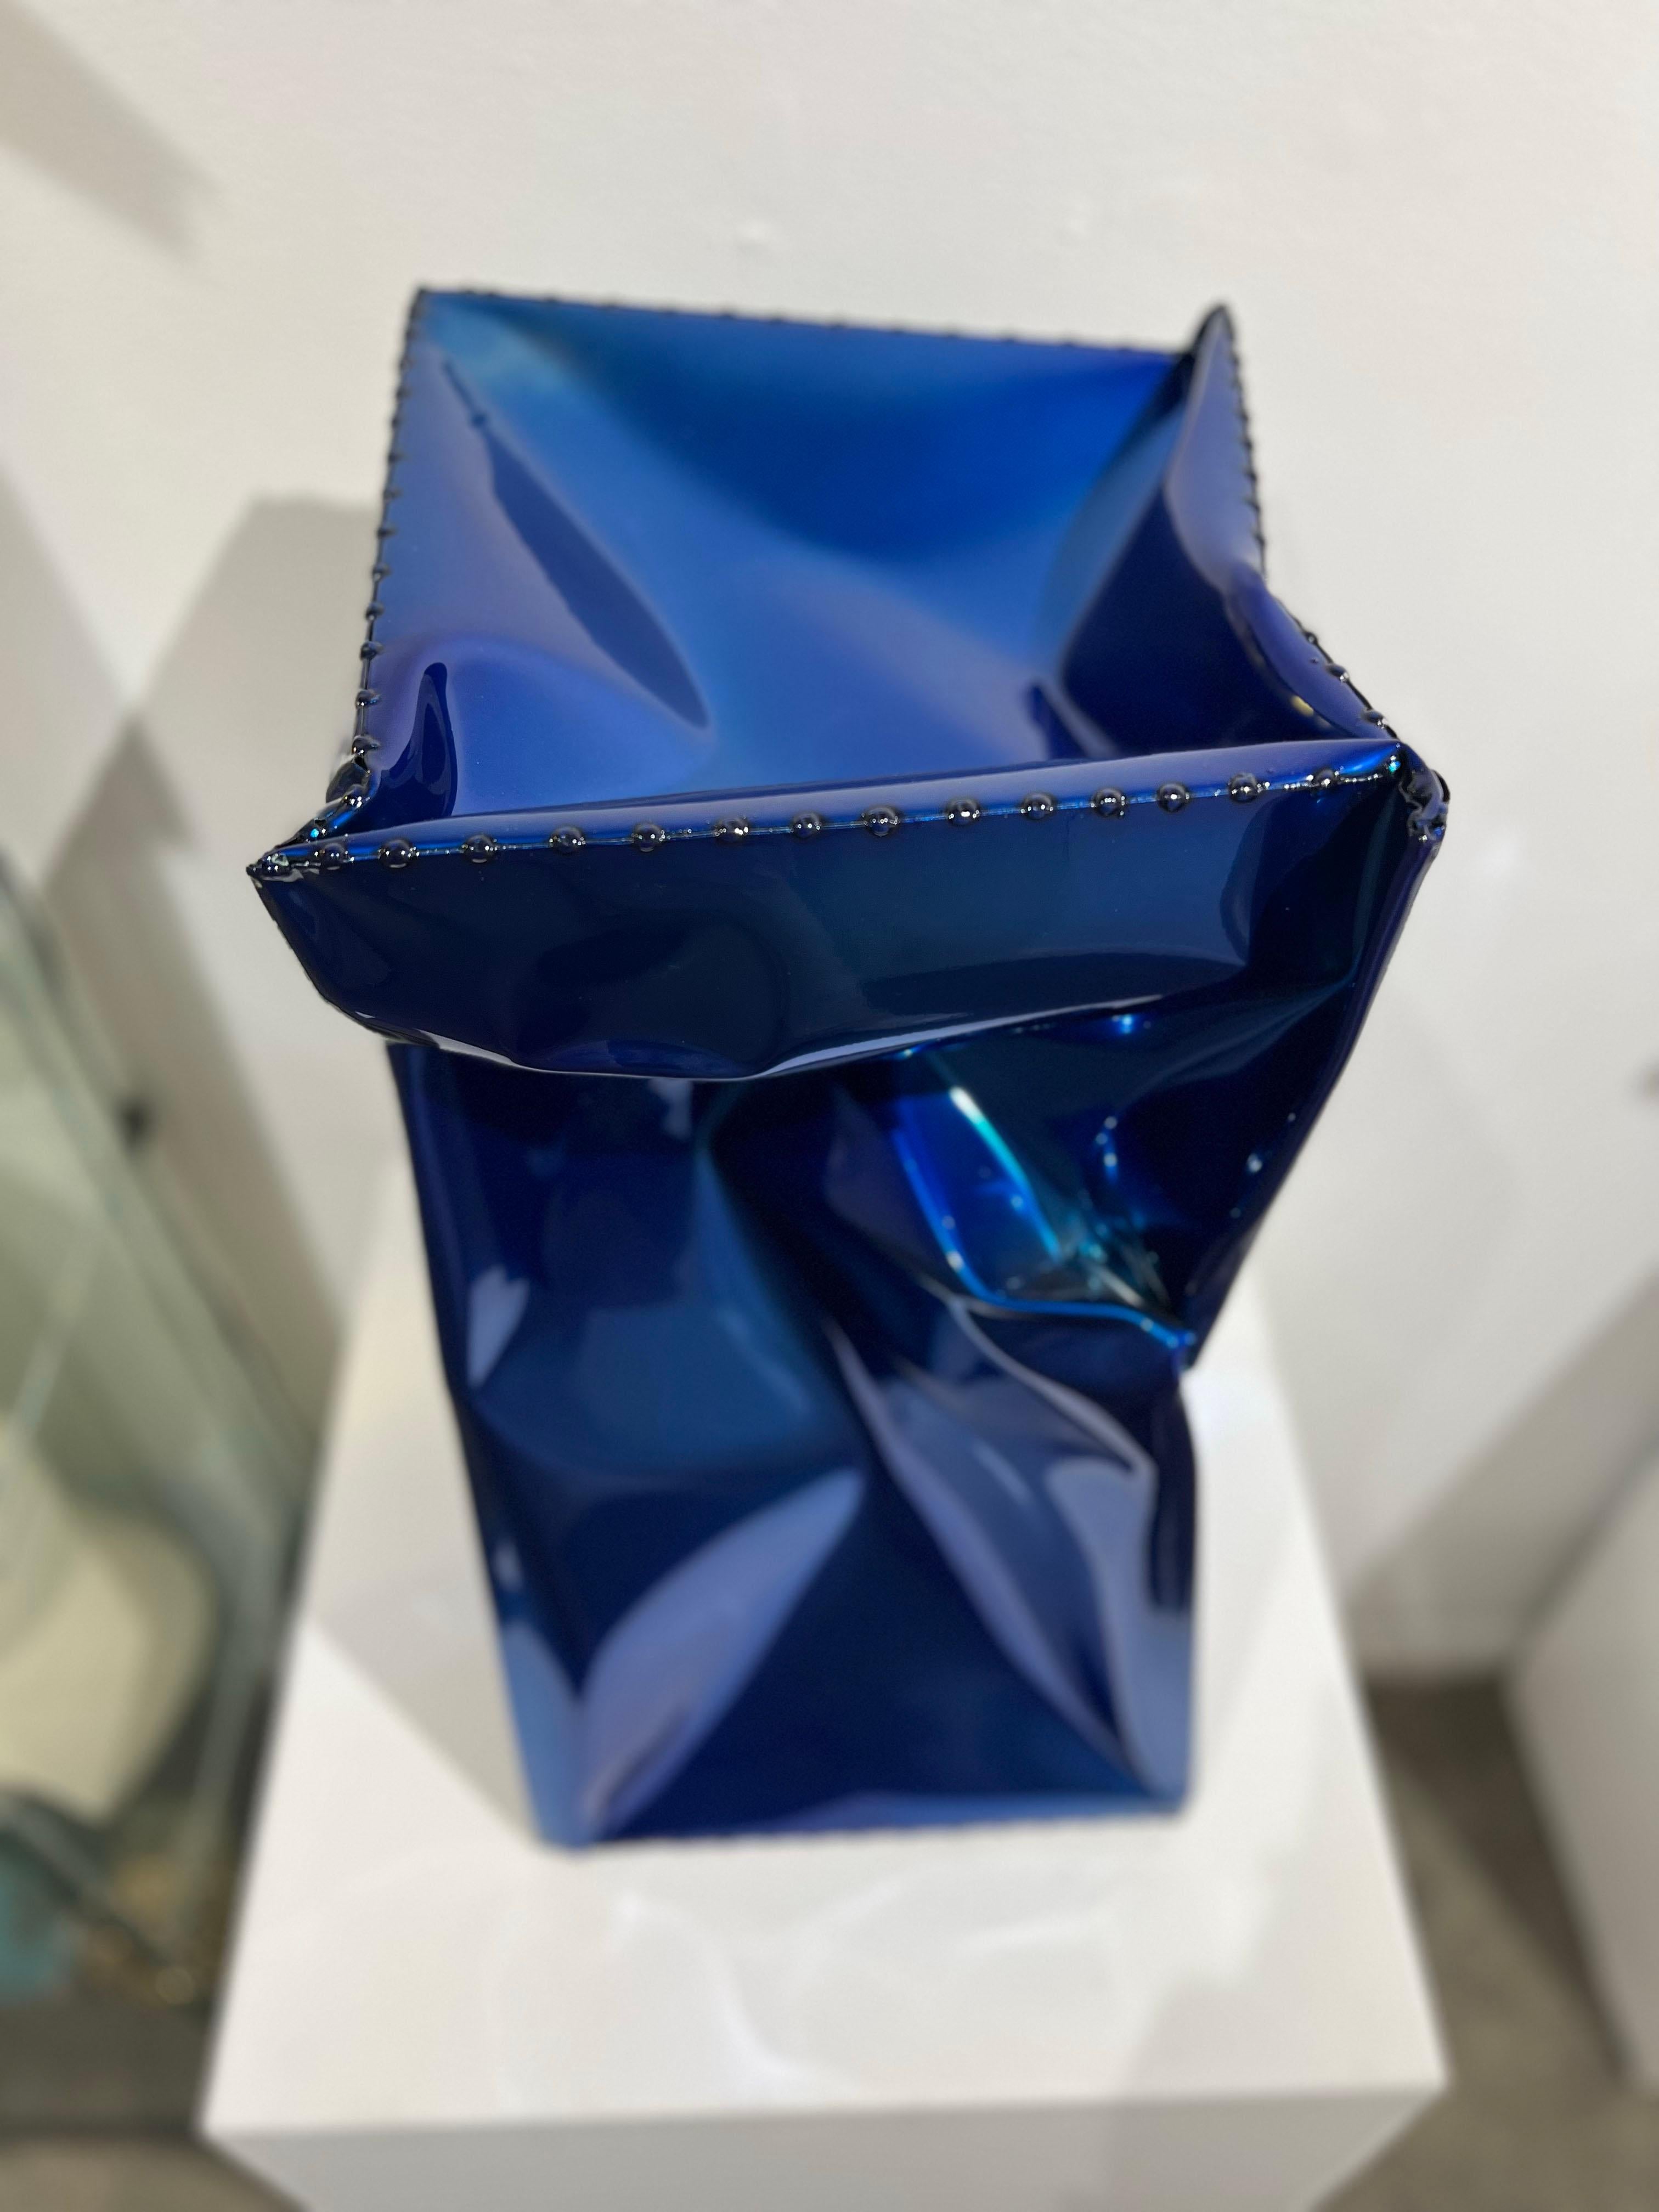 An outdoor sculpture made out of powder coated stainless steel. This sculpture is a rich, vibrant, and shiny blue. 

Rick Lazes is a three dimensional artist who works in a variety of media including wood, plaster, stainless steel, glass,